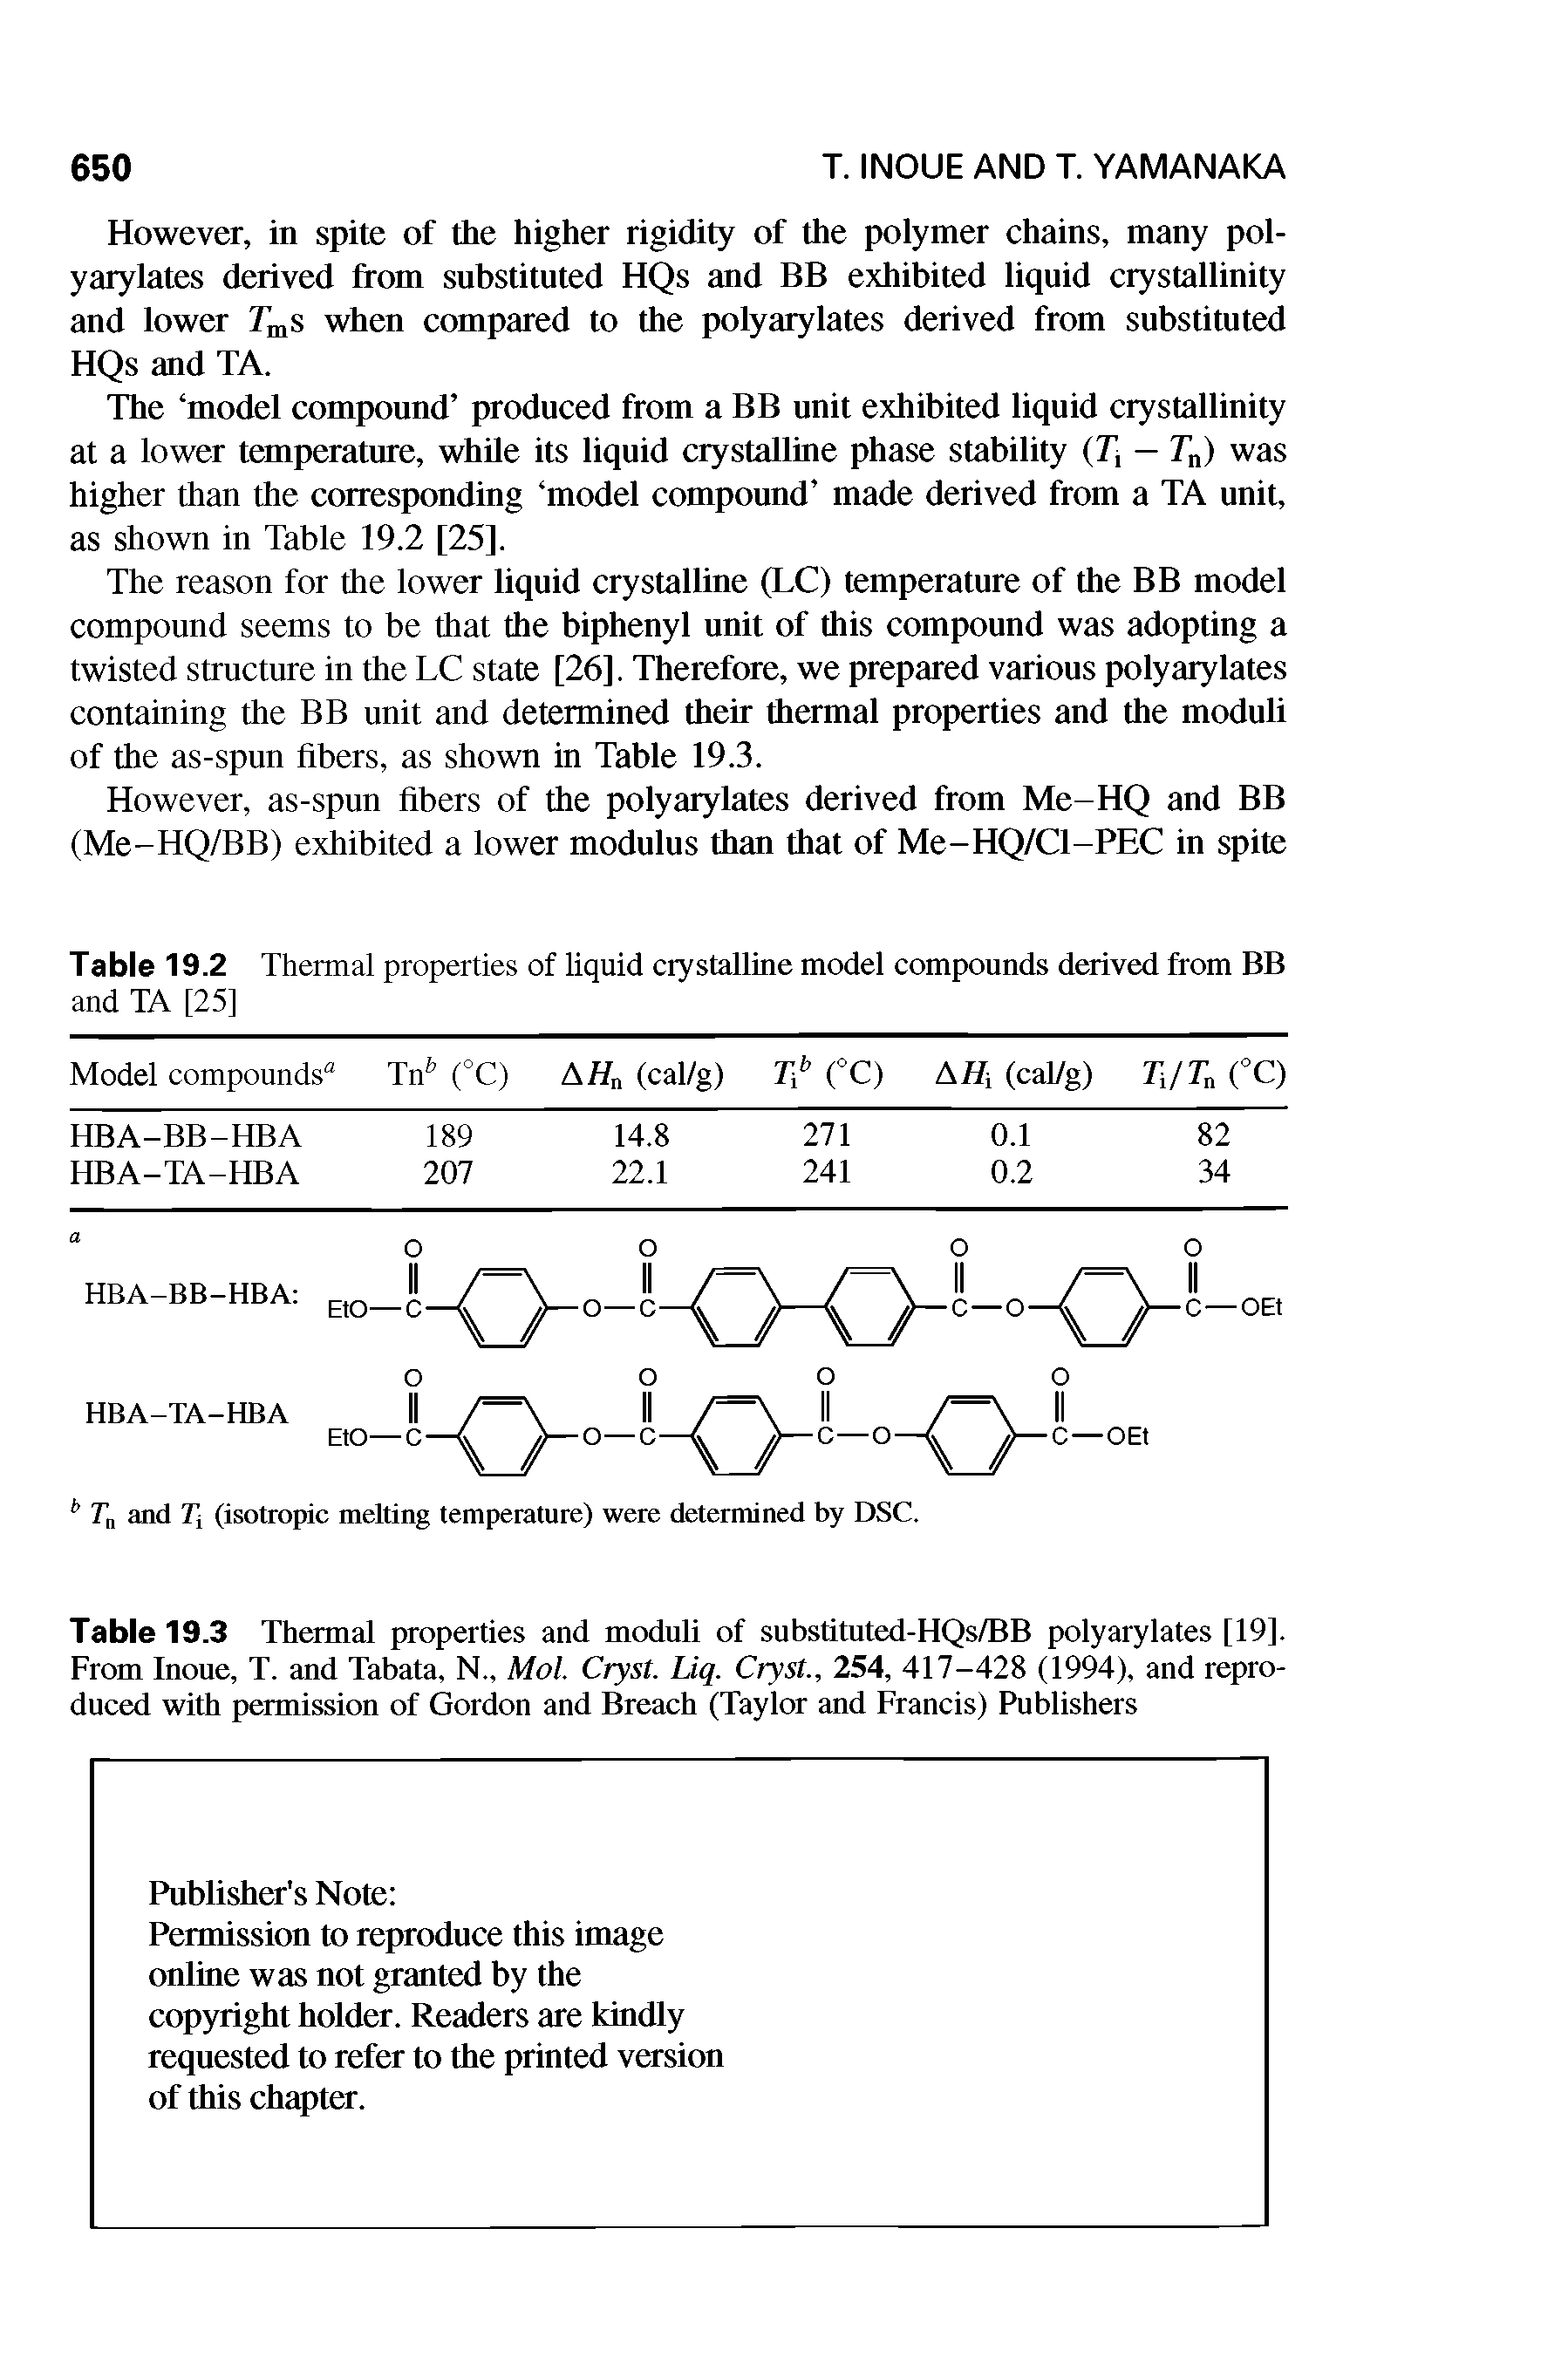 Table 19.3 Thermal properties and moduli of substituted-HQs/BB polyarylates [19]. From Inoue, T. and Tabata, N., Mol. Cryst. Liq. Cryst., 254, 417-428 (1994), and reproduced with permission of Gordon and Breach (Taylor and Francis) Publishers...